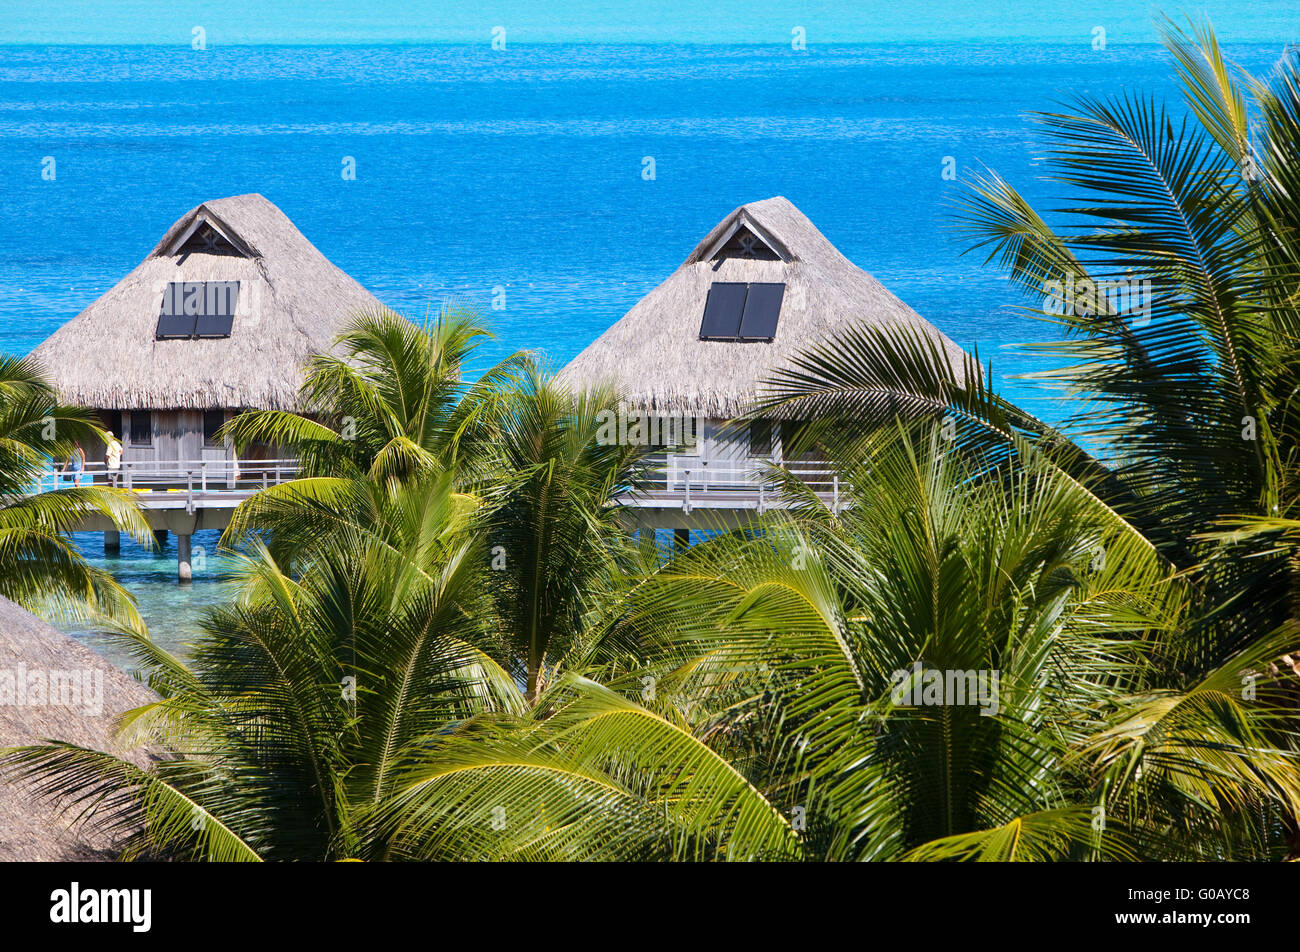 seacoast with palm trees and small houses on water Stock Photo